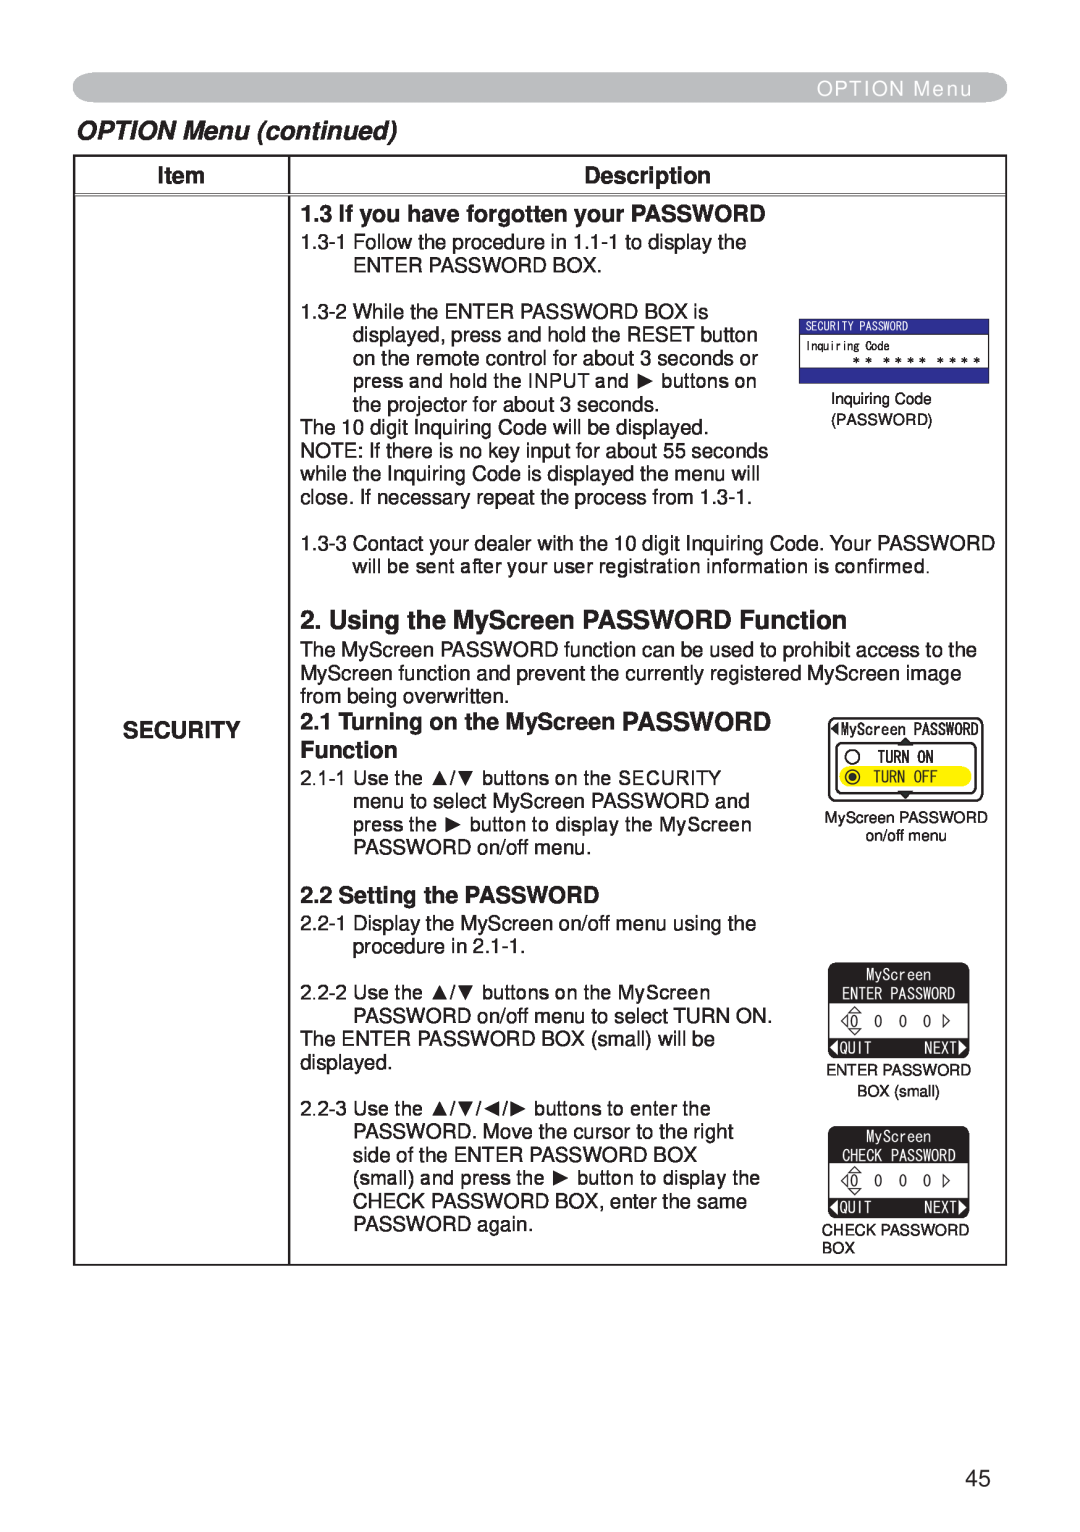 Hitachi CP-X265 Using the MyScreen PASSWORD Function, OPTION Menu continued, Description, Security, Setting the PASSWORD 